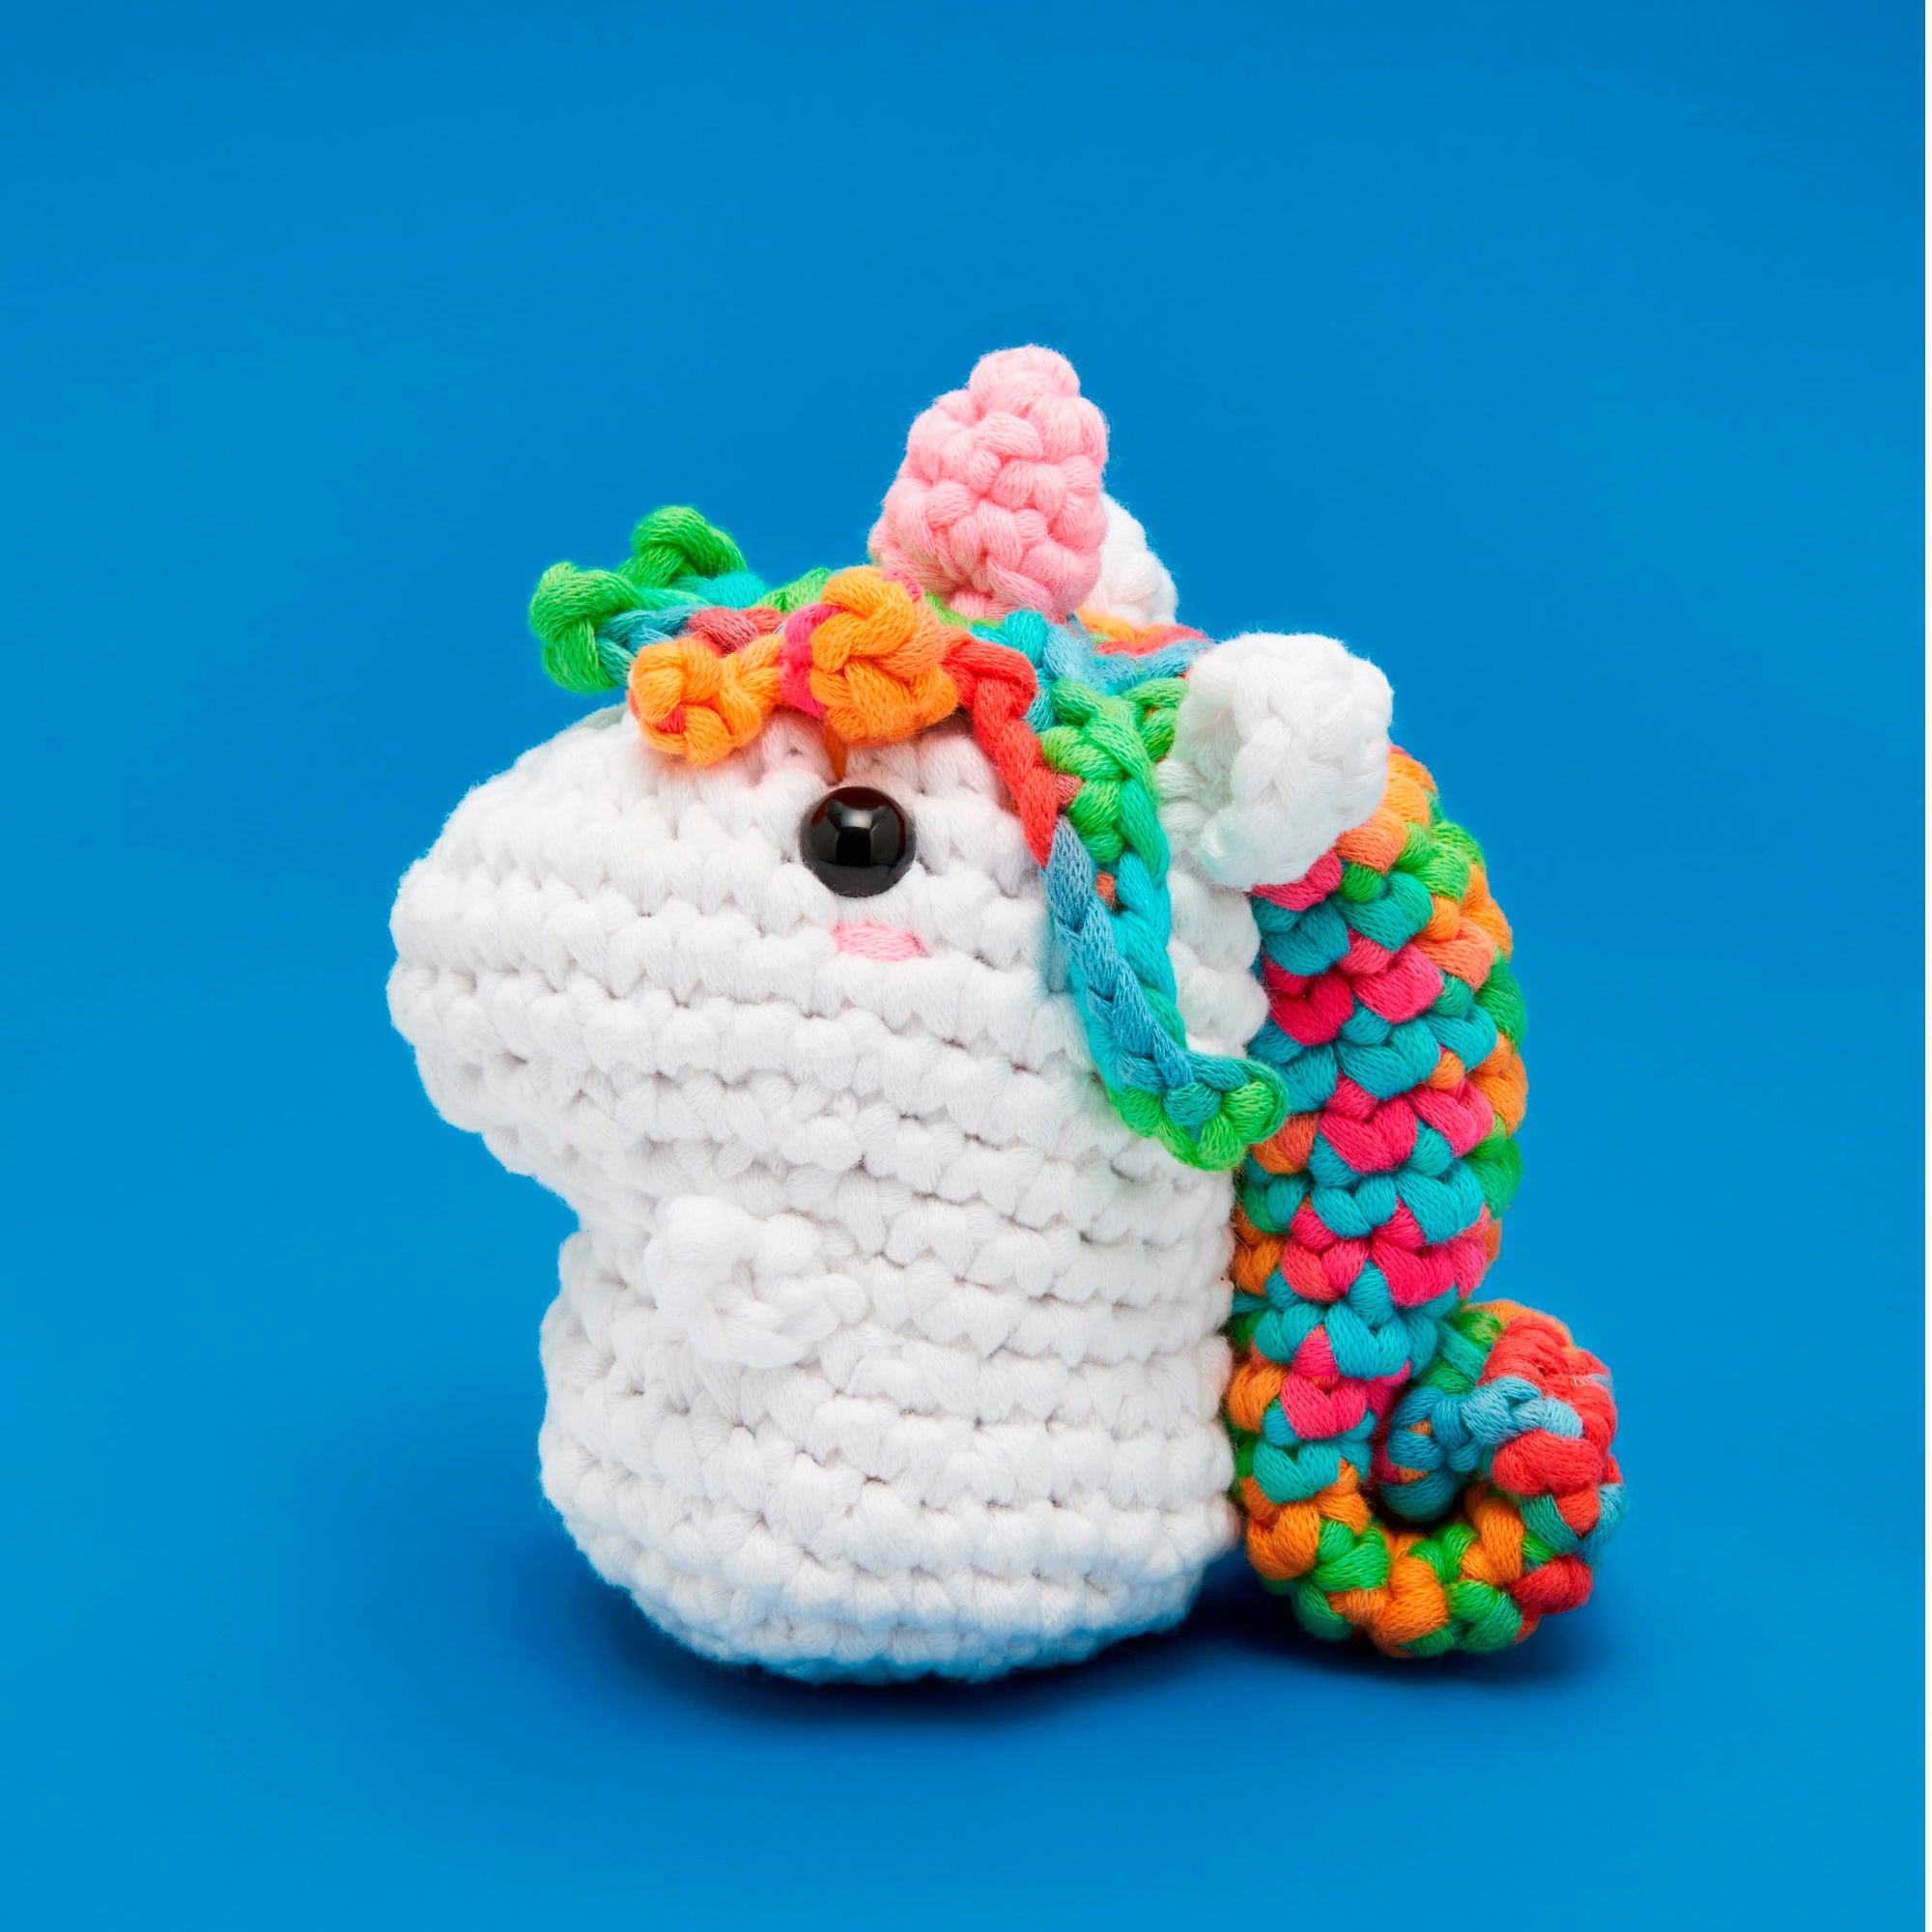 The Woobles Rainbow Billy the Unicorn Crochet Kit Review